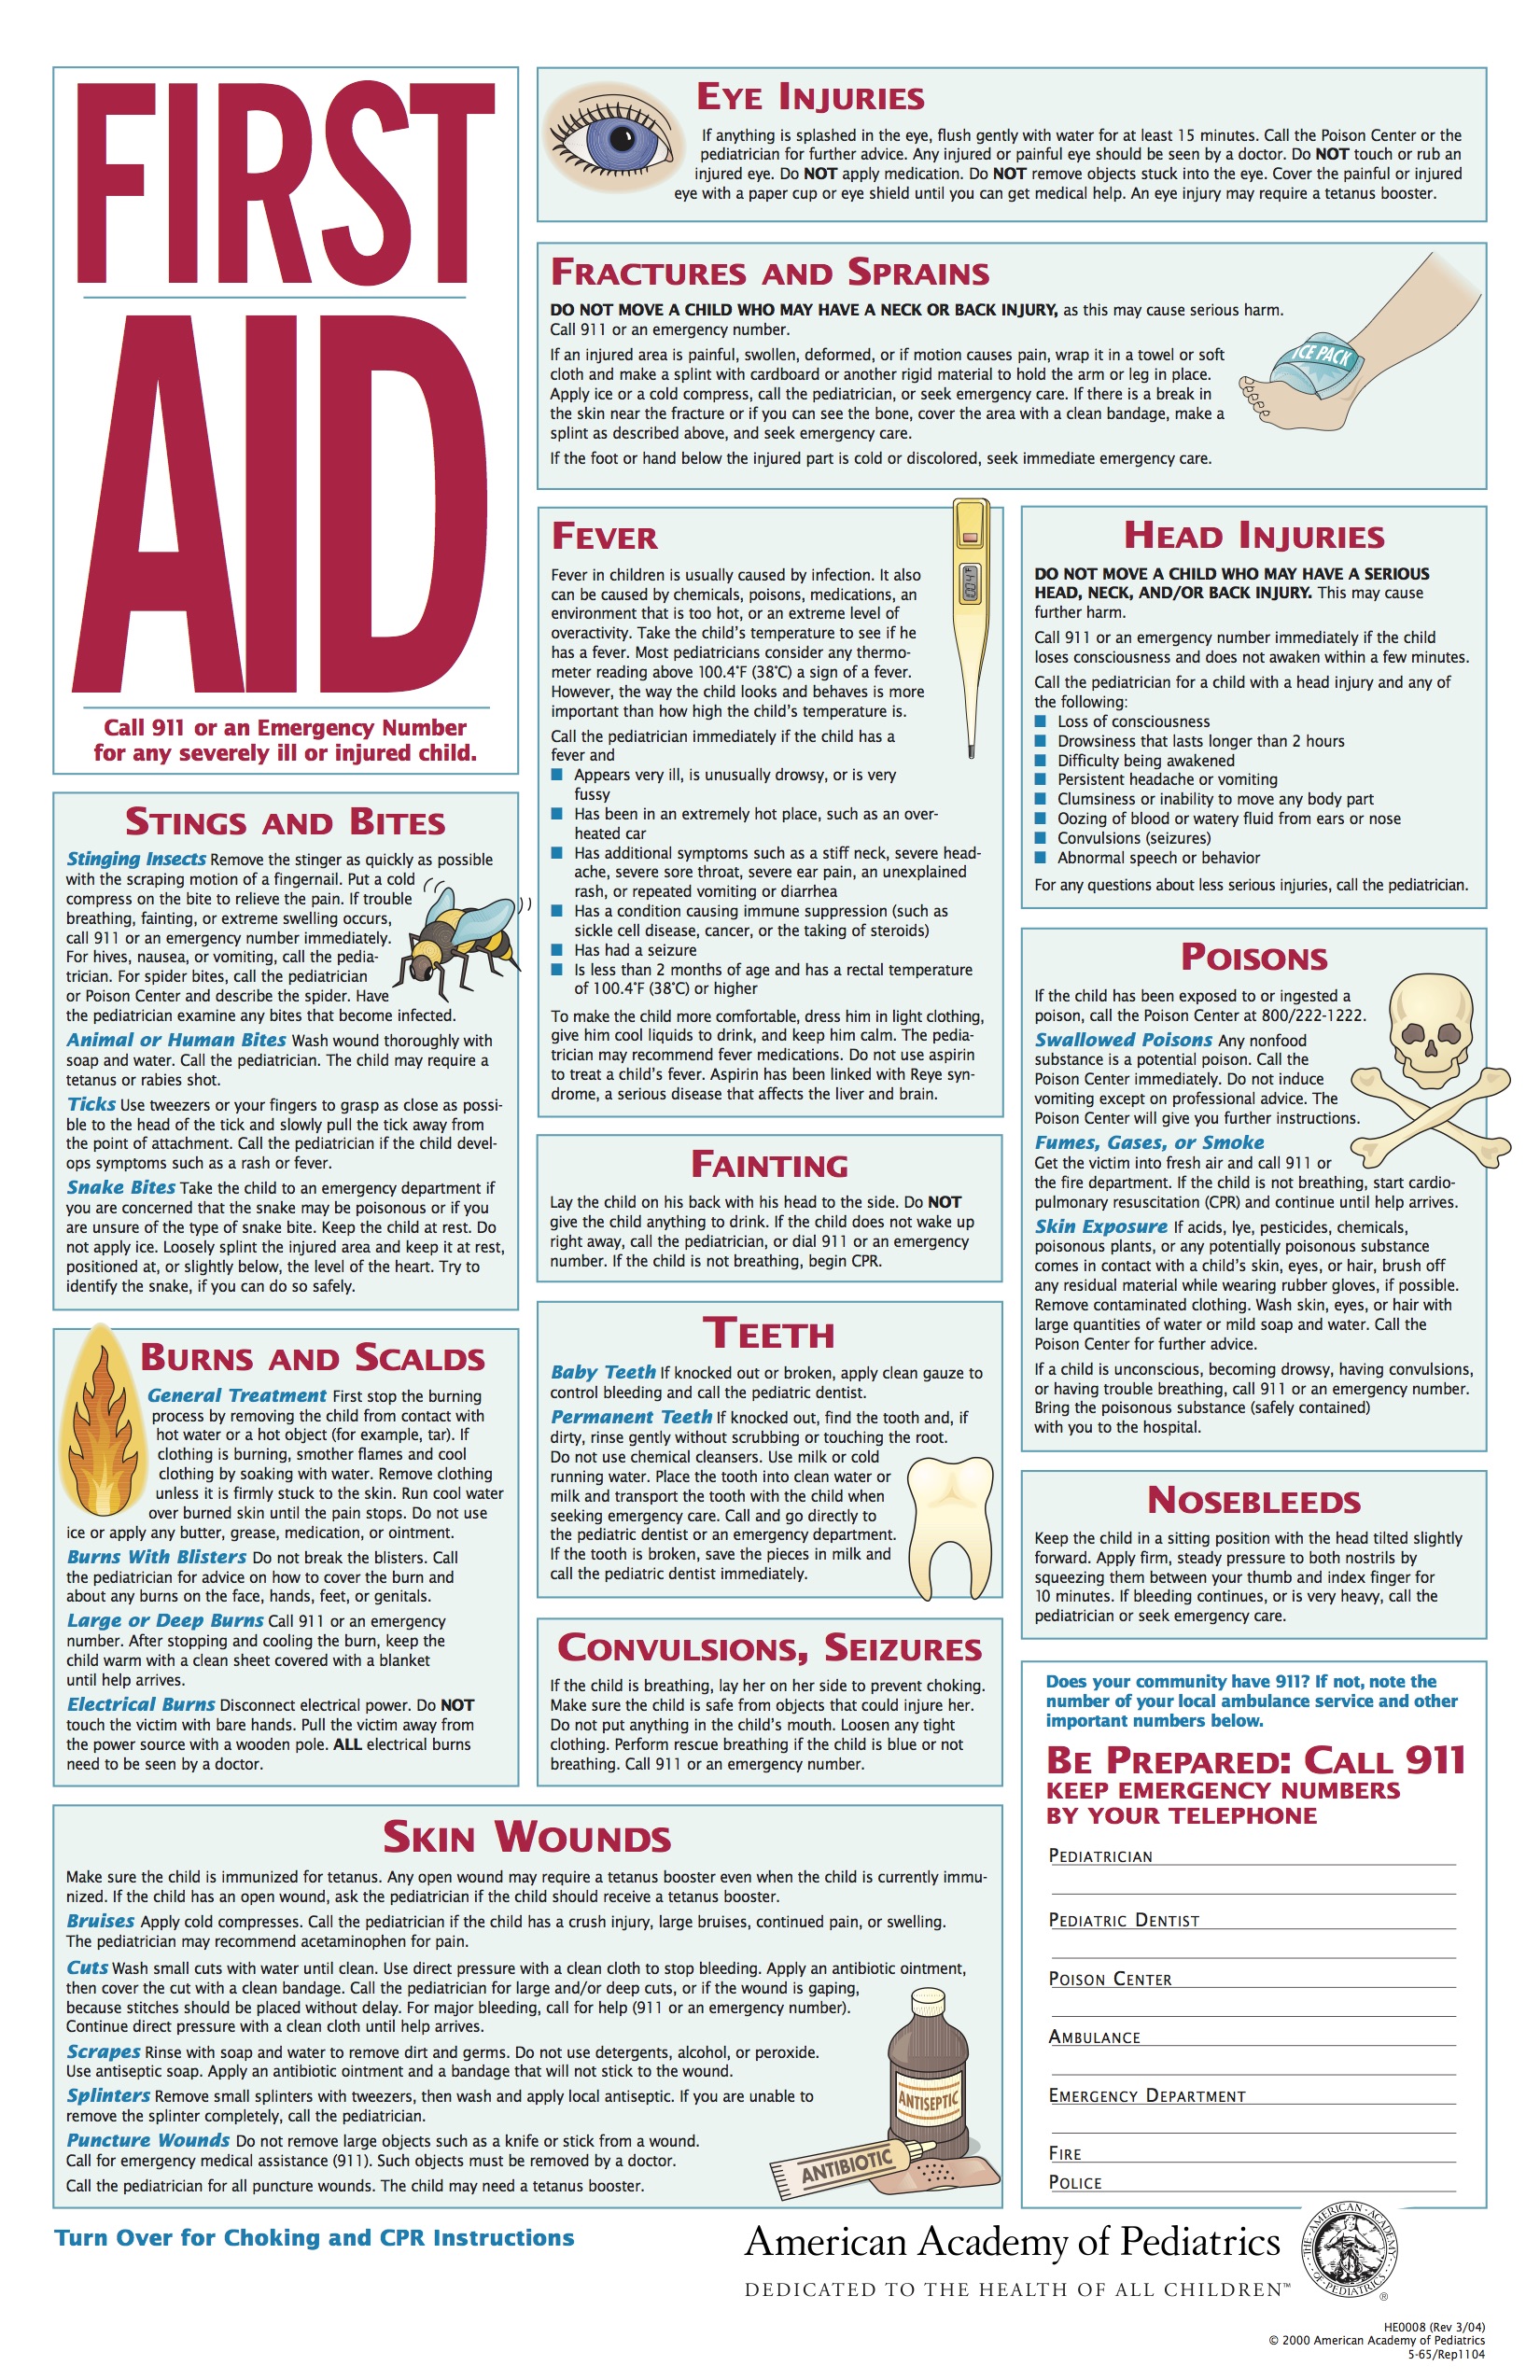 aap-first-aid-guide-print-and-post-in-your-home-pacific-ocean